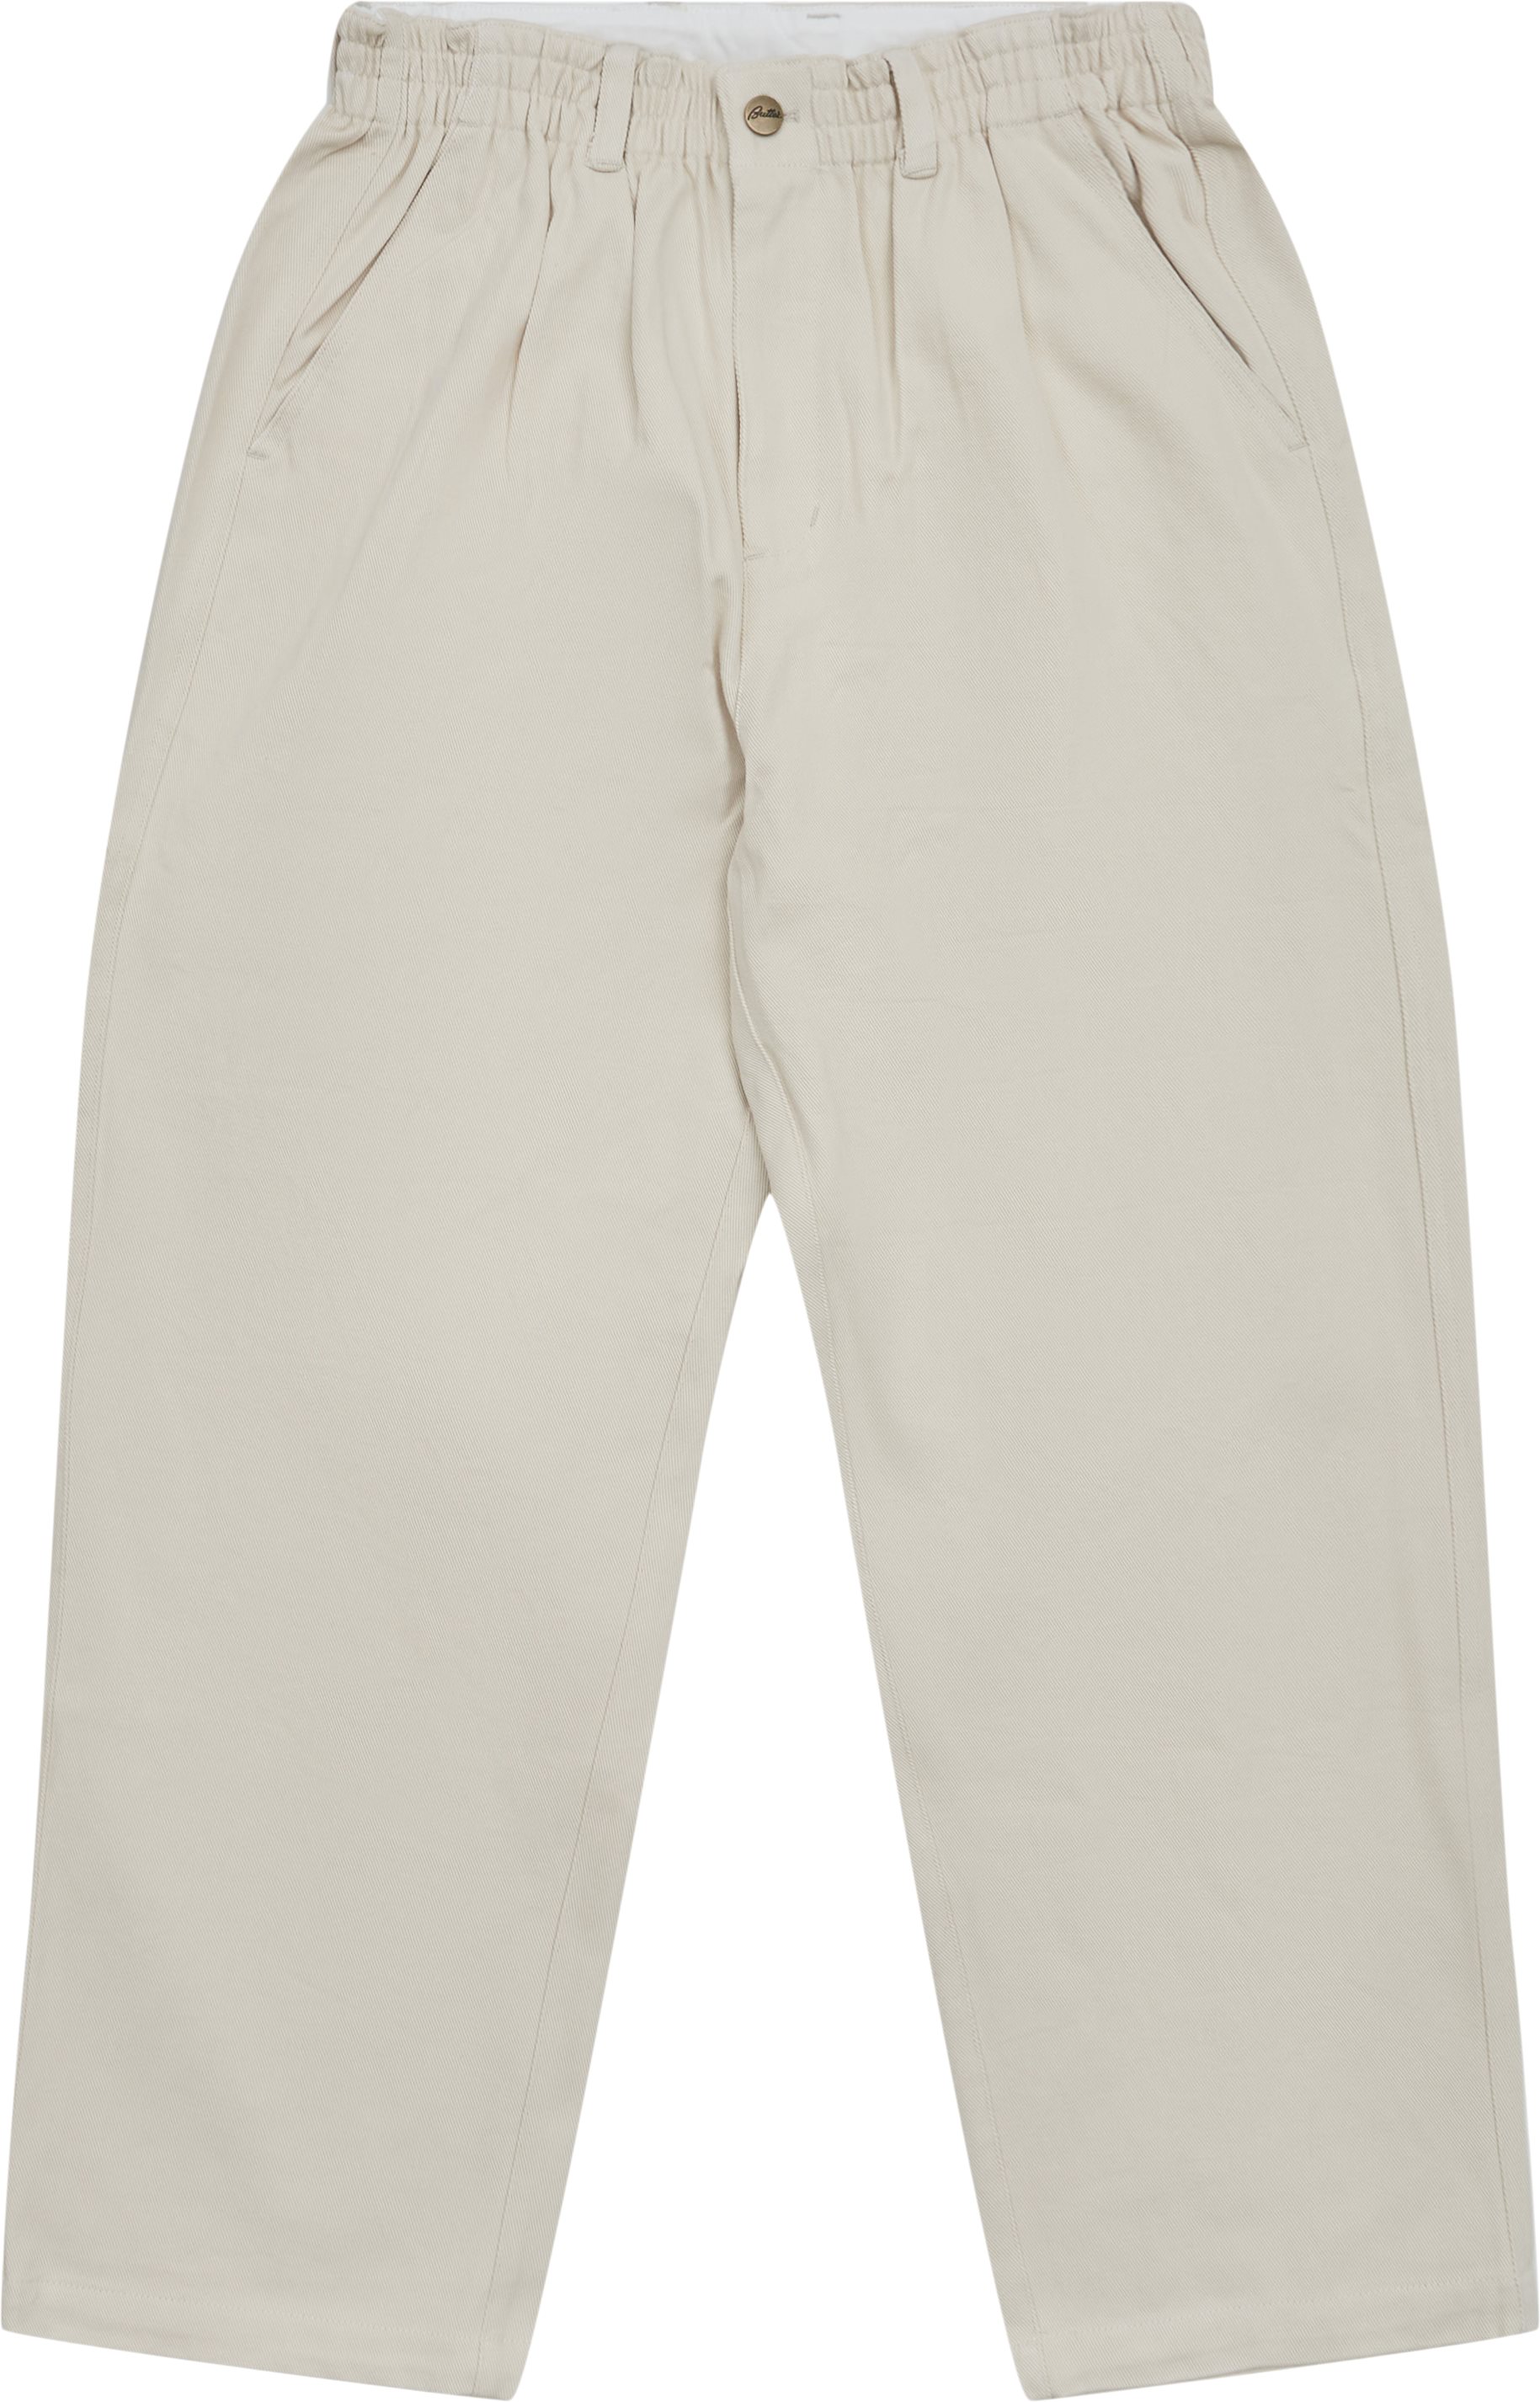 Trousers - Loose fit - White